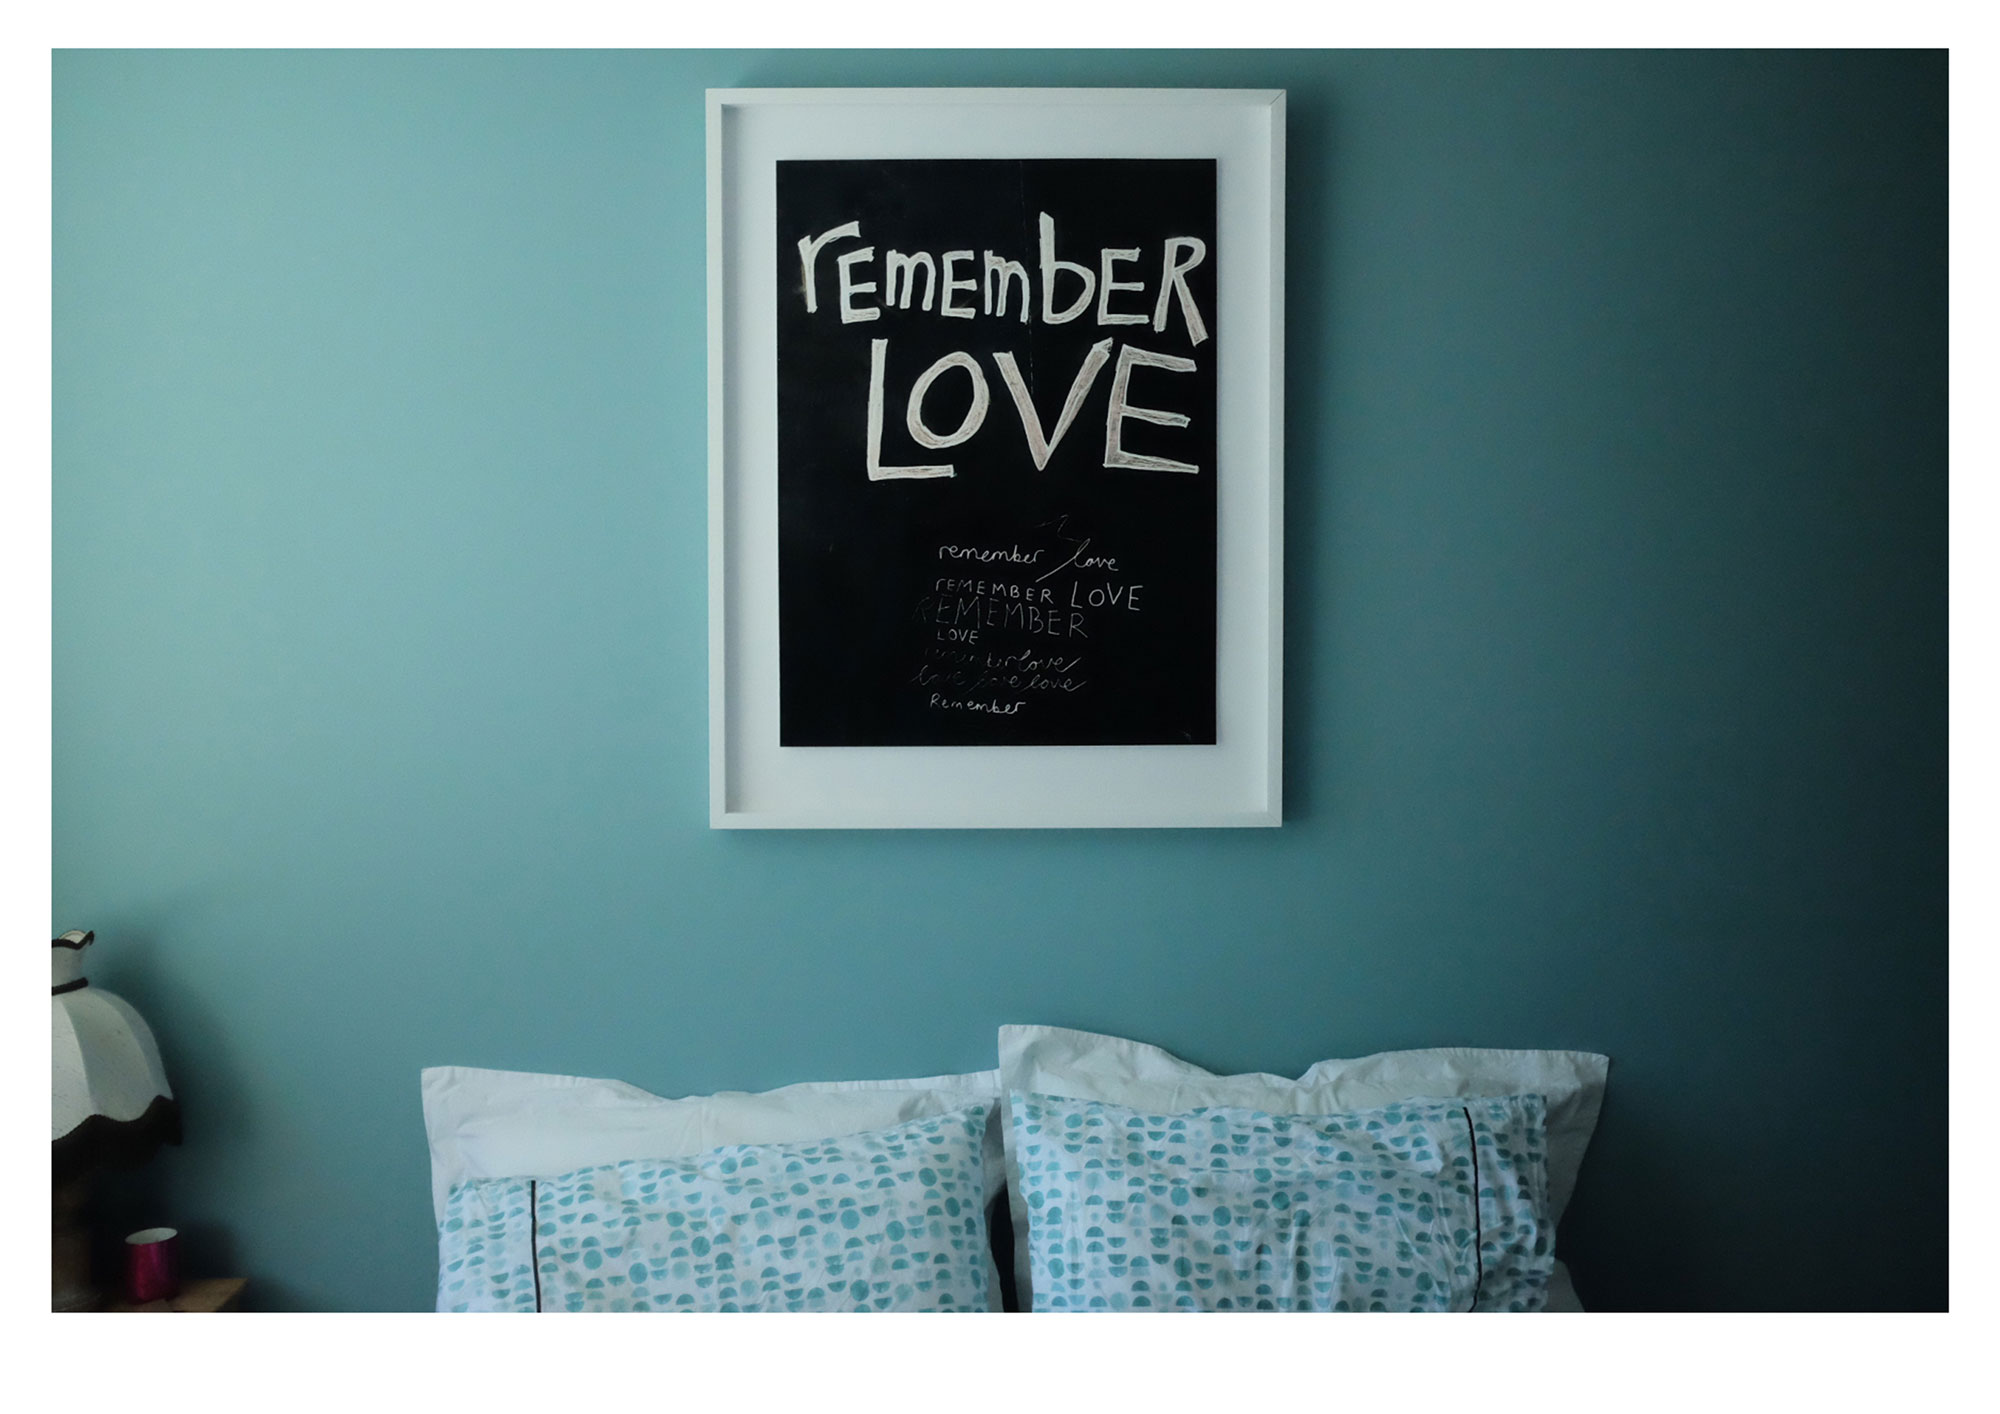   Remember love  [2017 version], Wellington, NZ, Limited edition [5] A0 exhibition print   